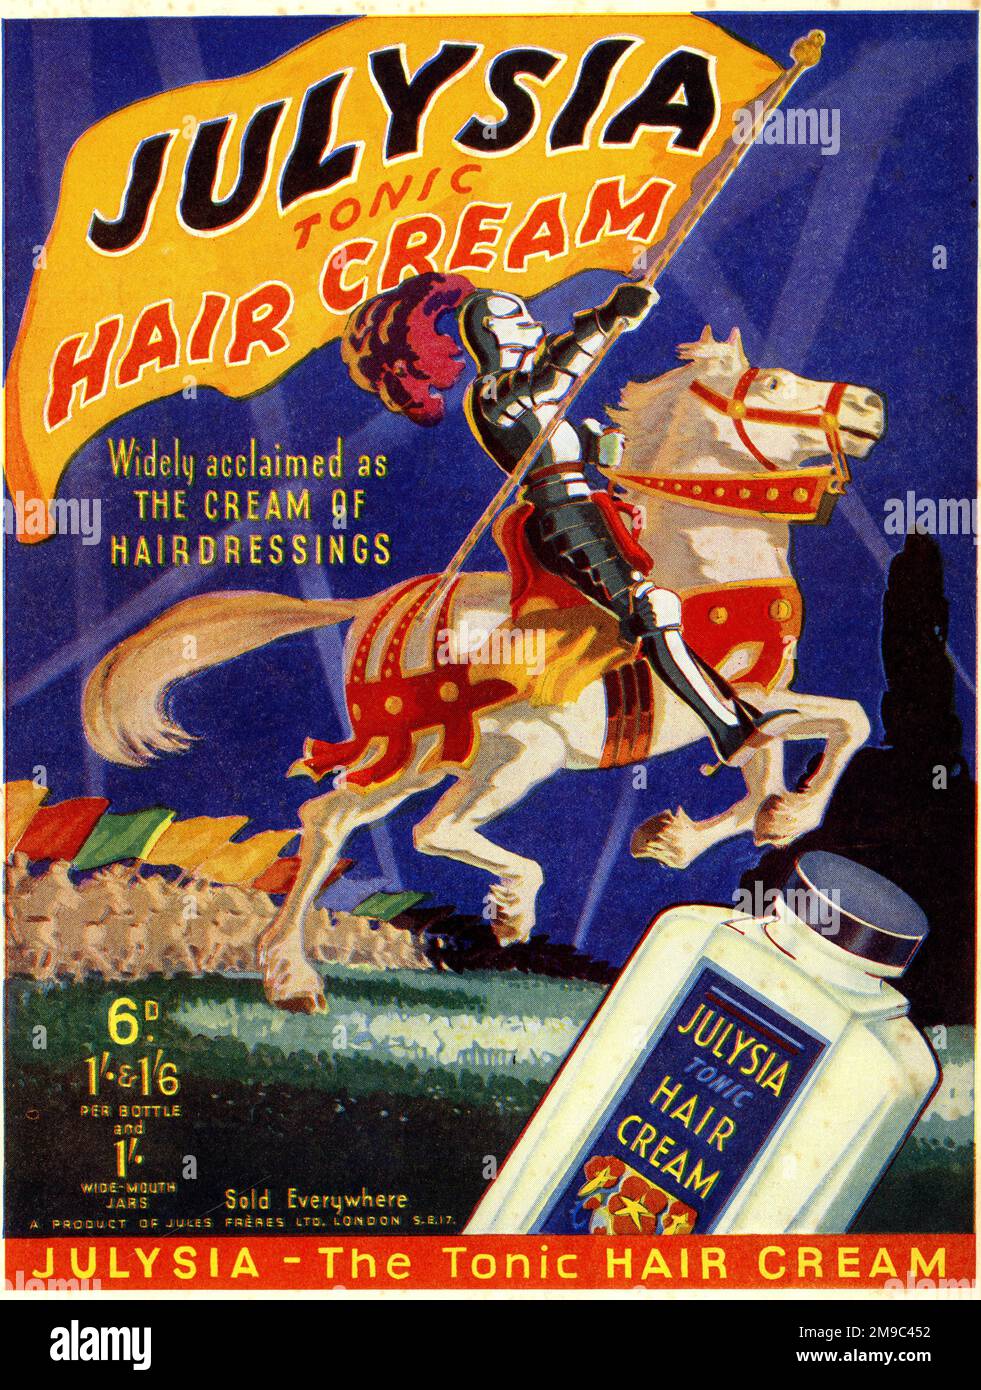 Advert, Julysia Tonic hair cream, widely acclaimed as the Cream of Hairdressings Stock Photo